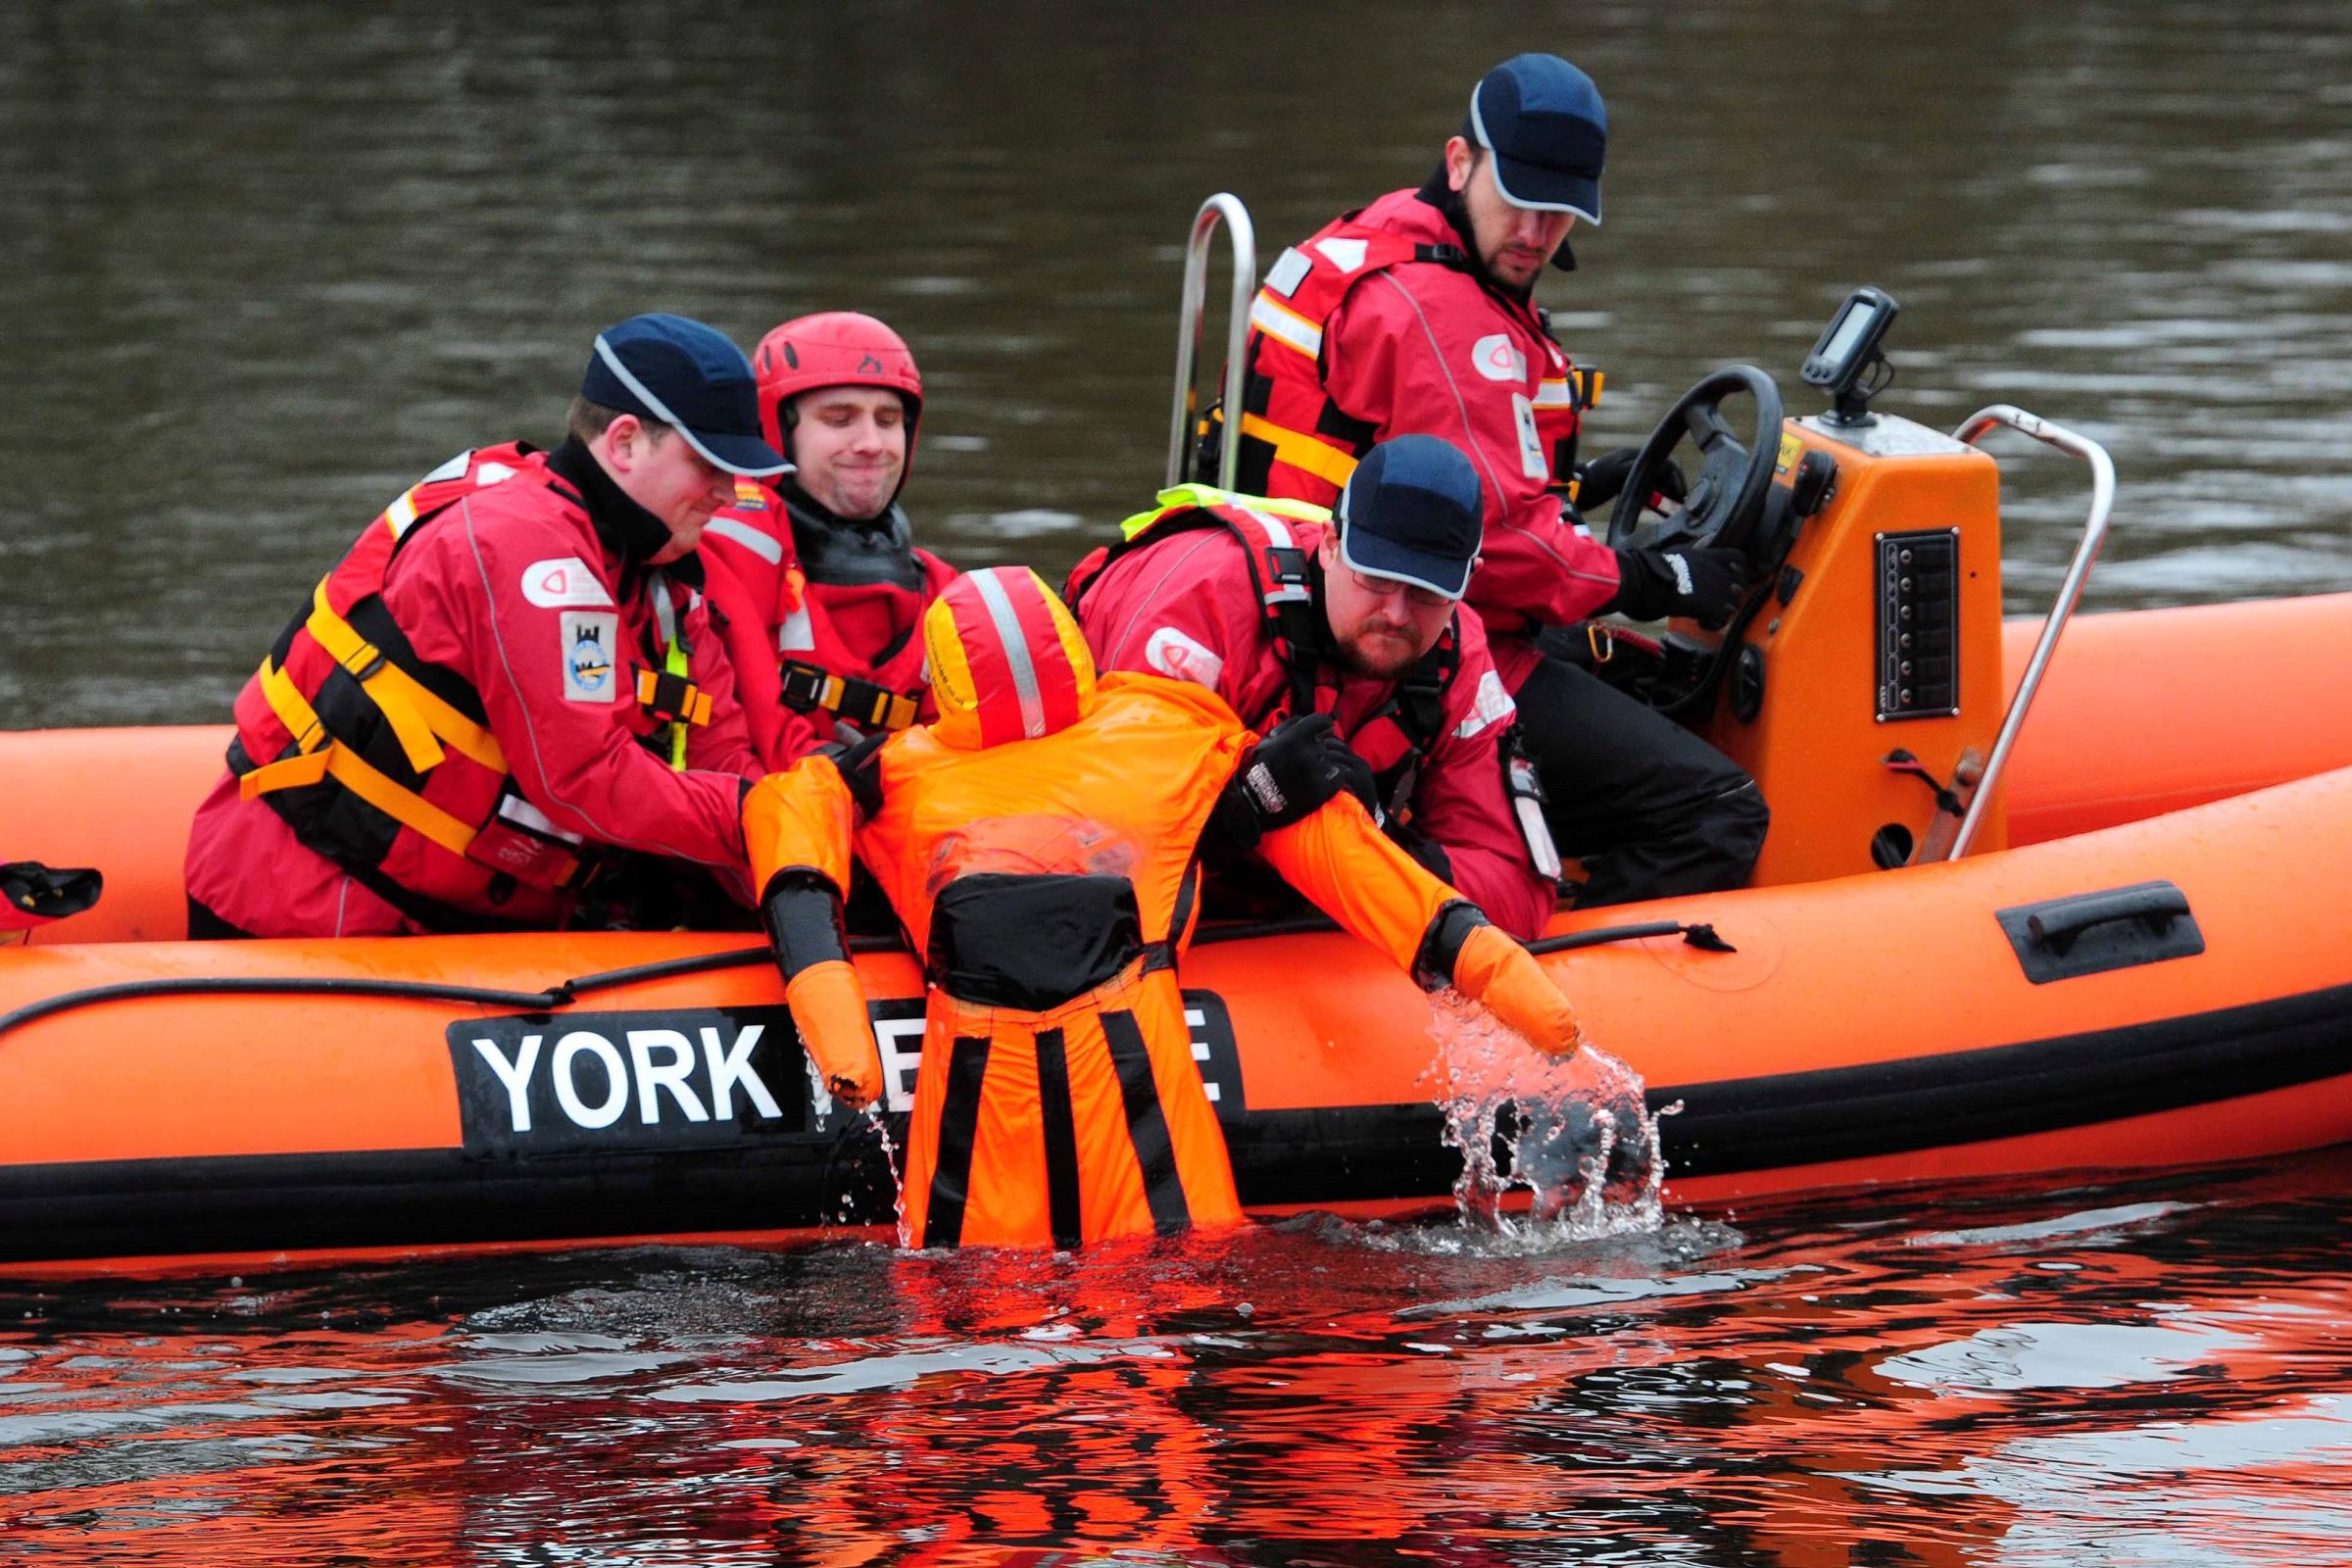 85% of York Rescue Boat incidents involve mental health problems